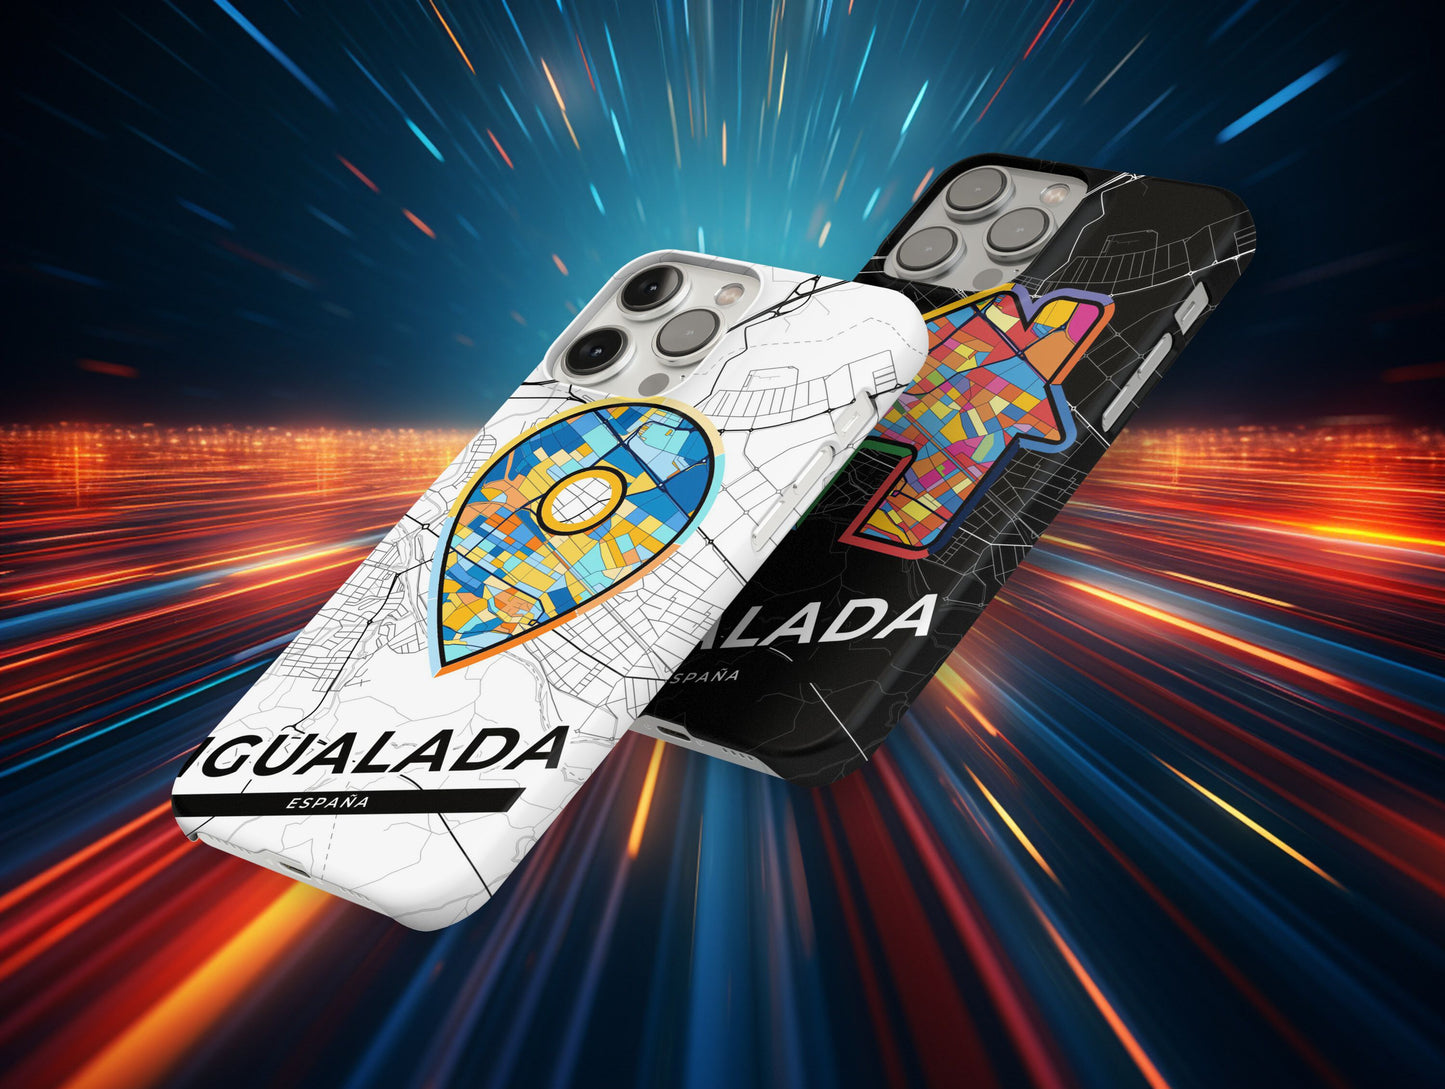 Igualada Spain slim phone case with colorful icon. Birthday, wedding or housewarming gift. Couple match cases.